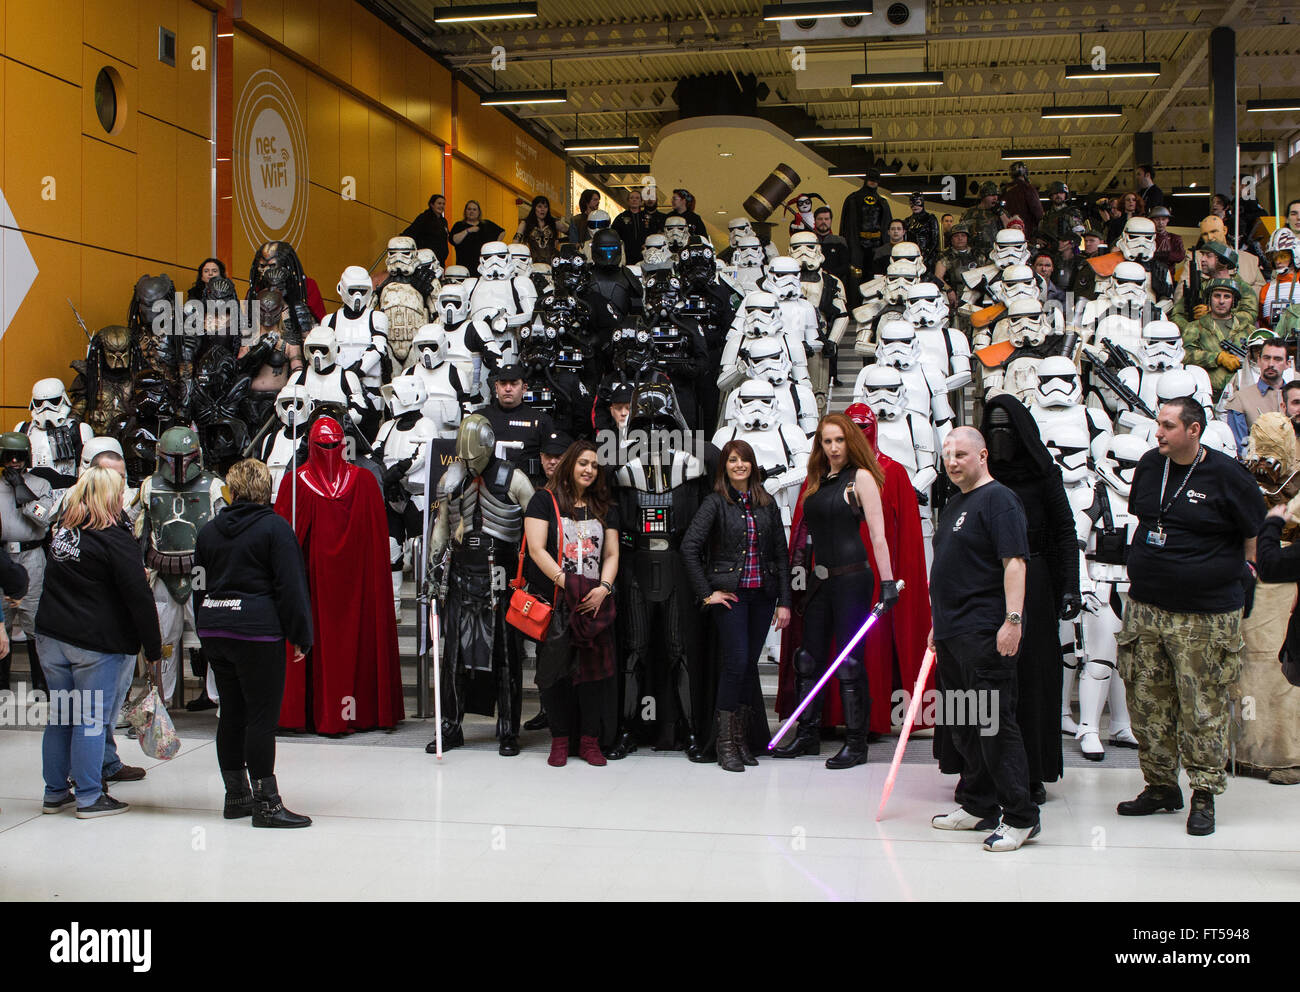 Star Wars characters at Cosplay event Stock Photo